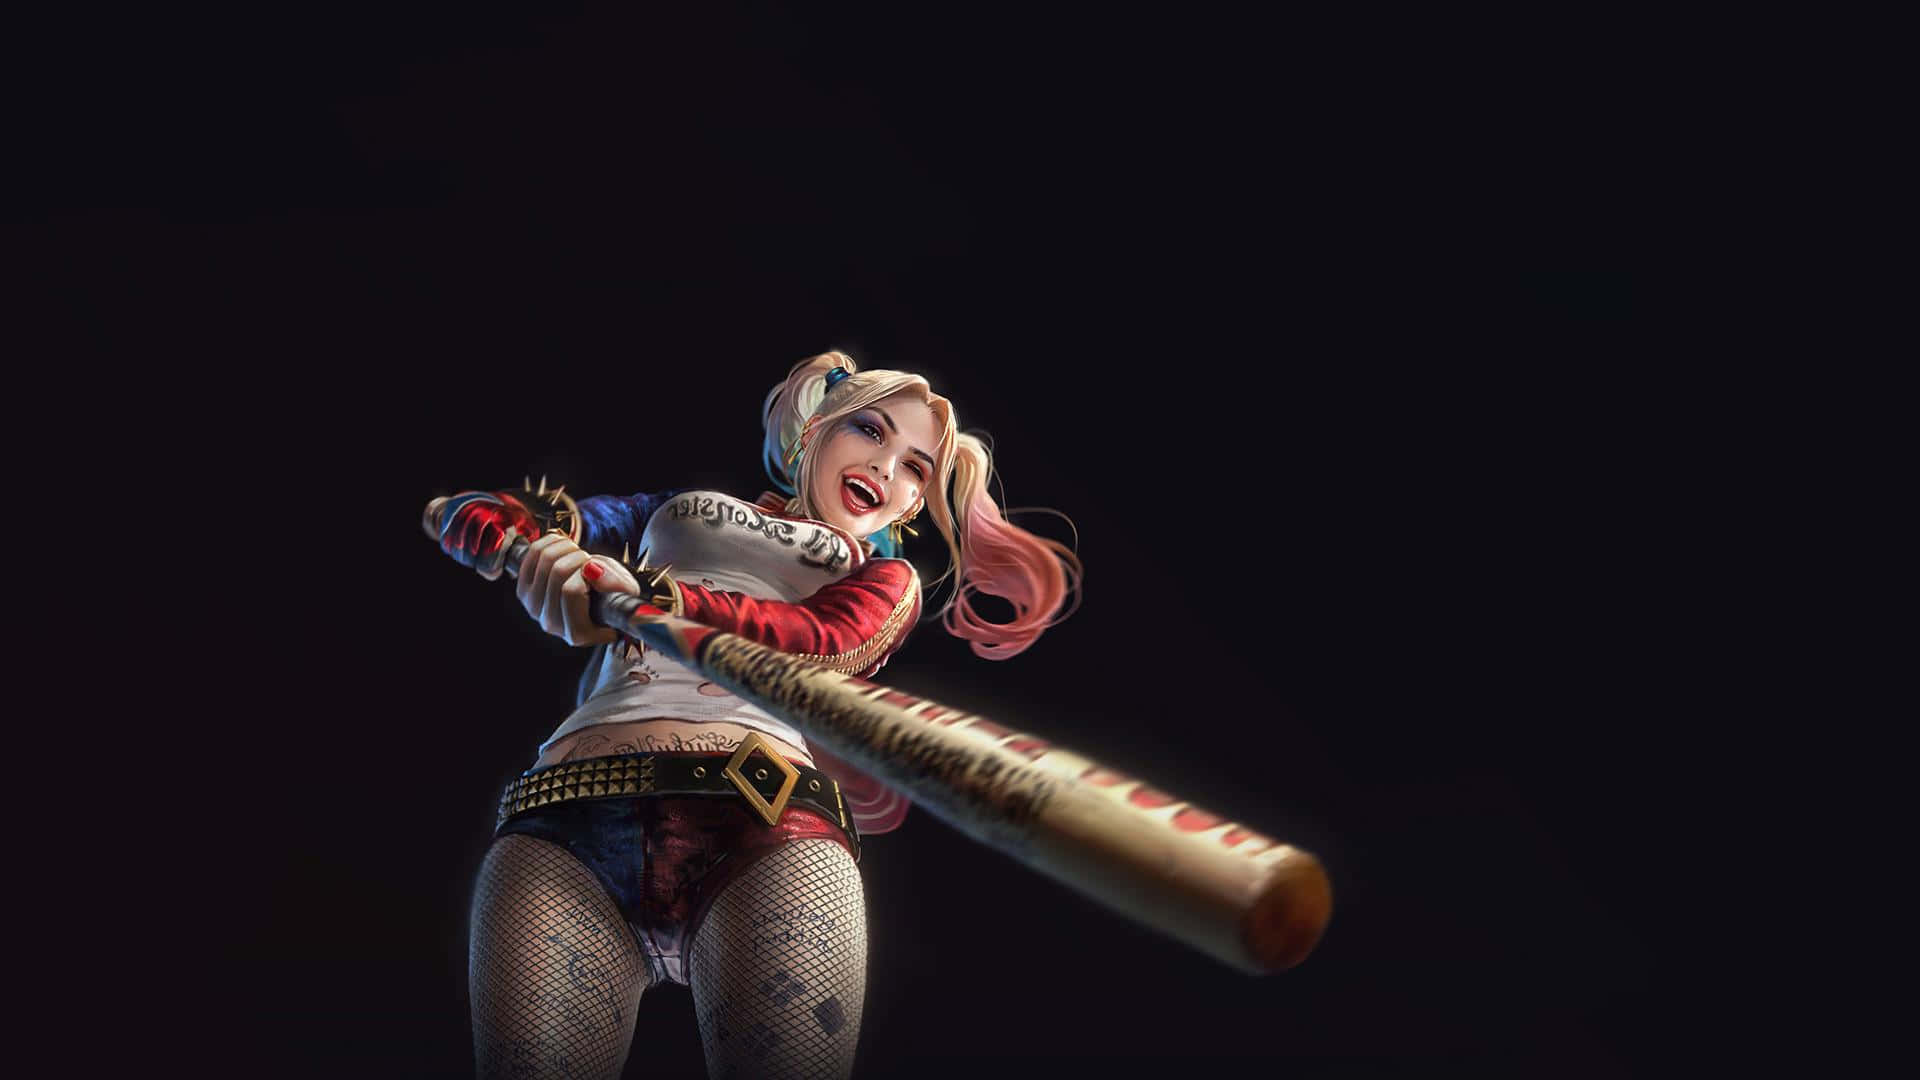 Download Harley Quinn Posing With Her Iconic Baseball Bat Wallpaper Wallpapers Com